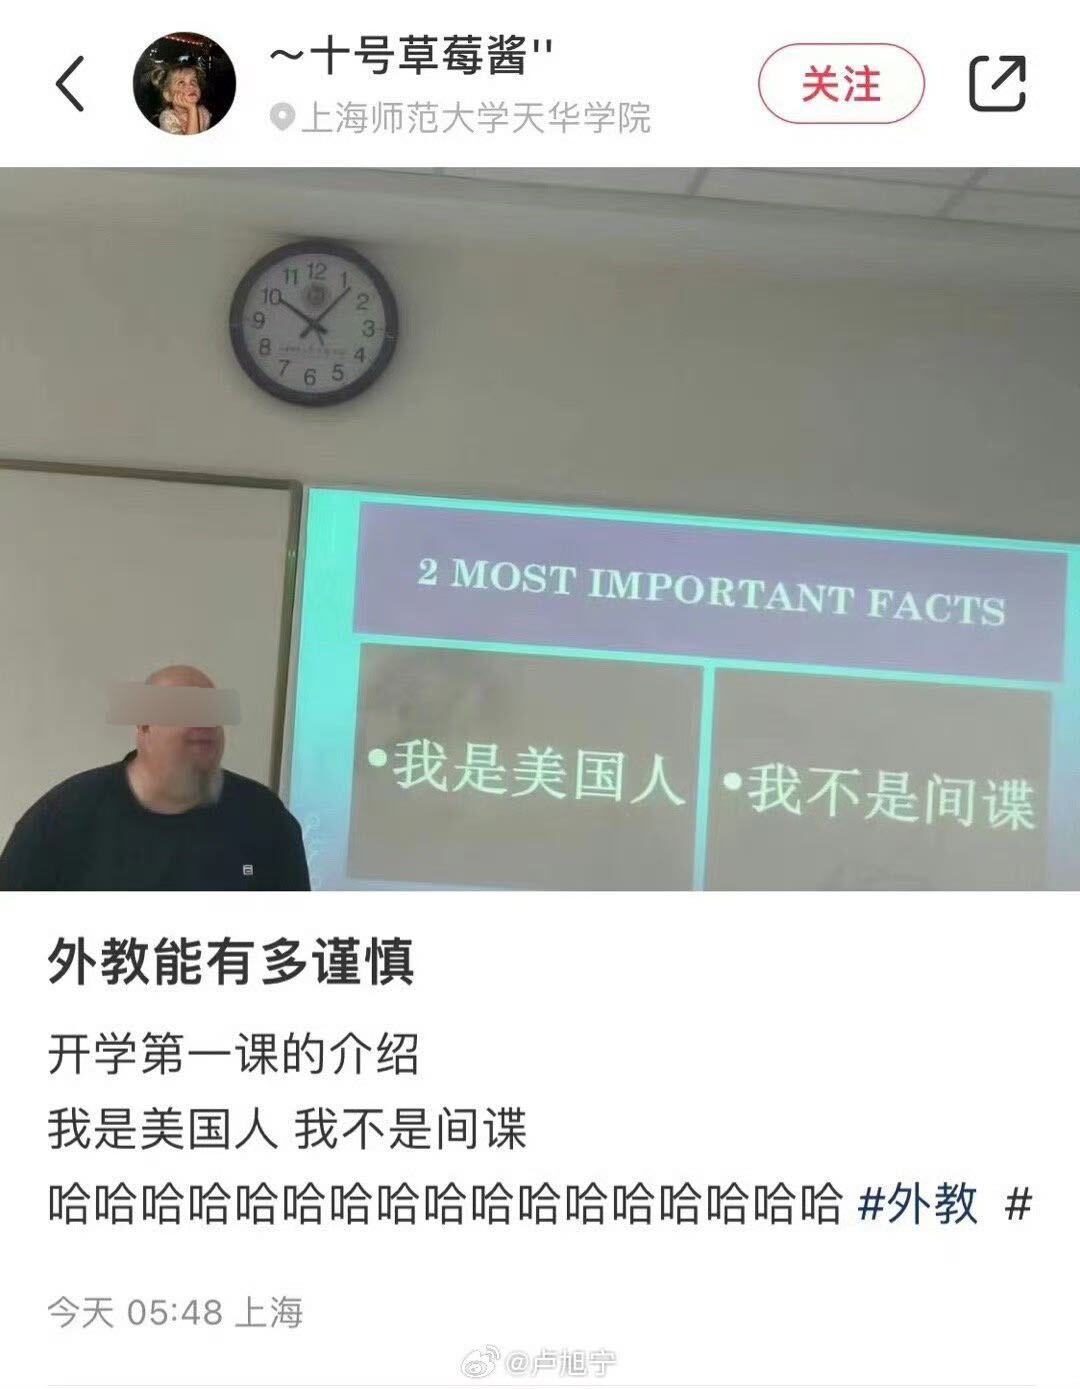 In this screenshot, a bearded teacher (whose face is partially obscured) wearing a black t-shirt stands next to a projection screen. The slide presentation on screen reads: “2 most important facts: I am American. I am not a spy.”